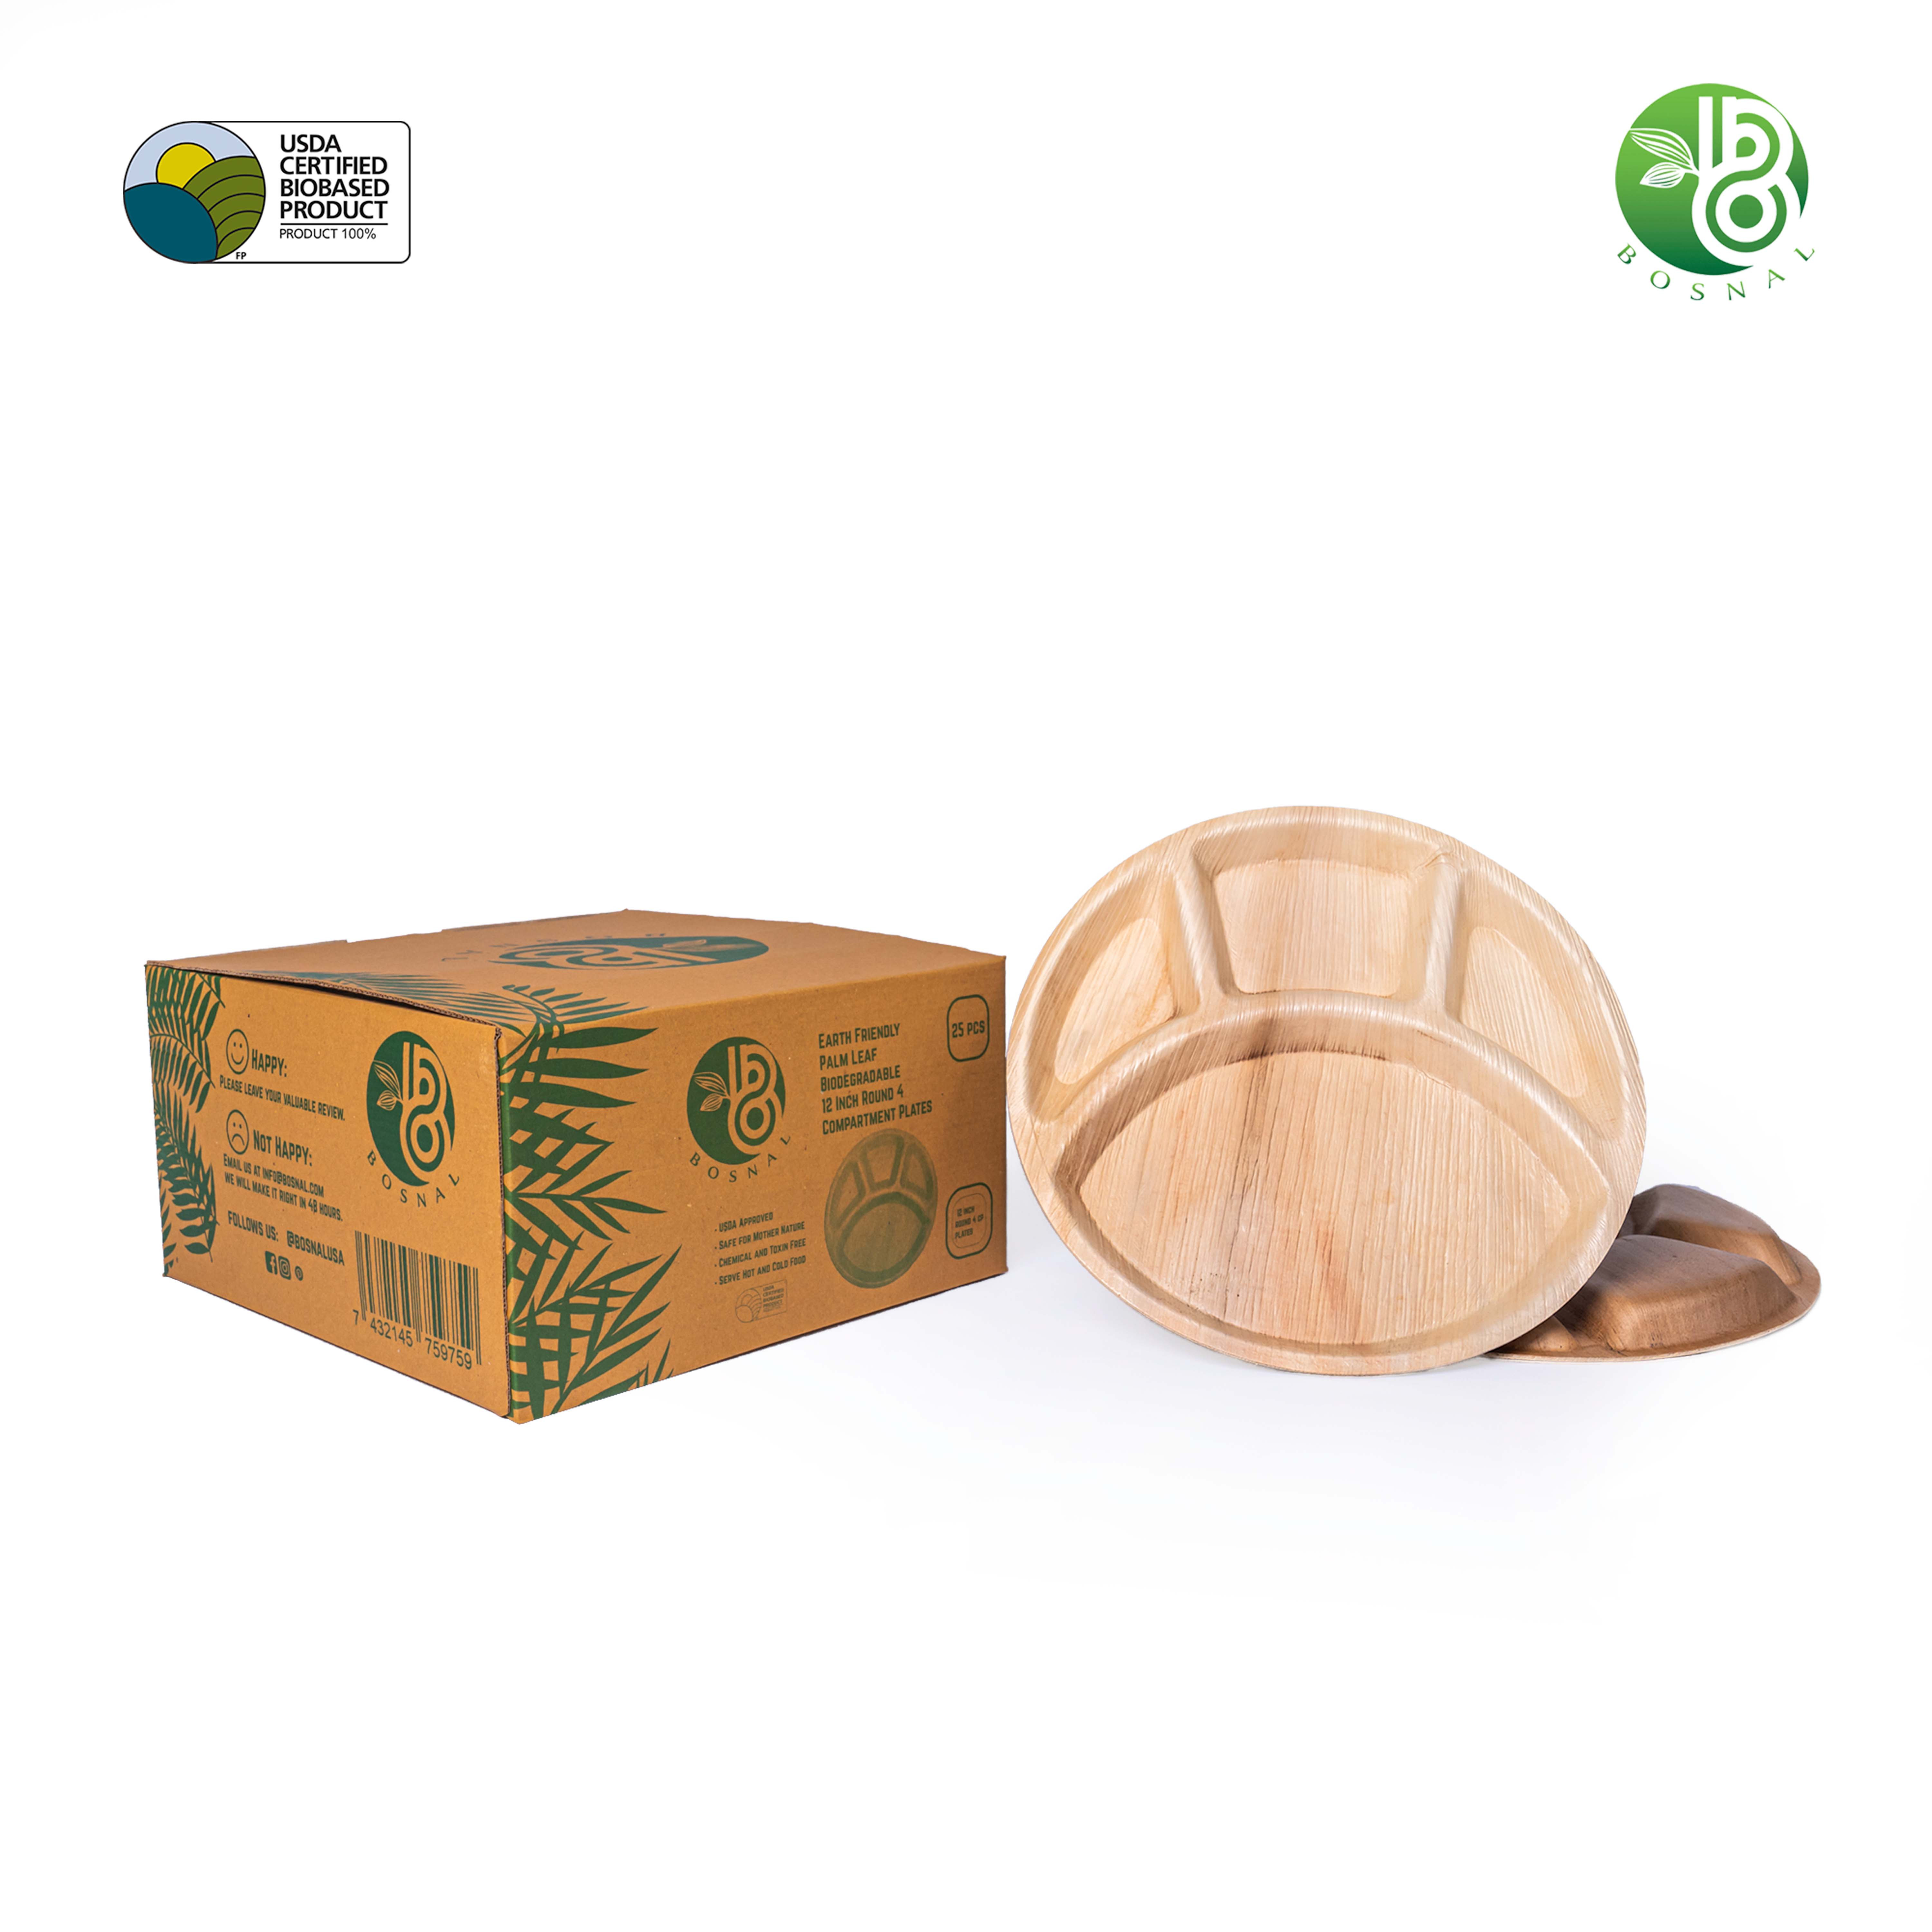 Bosnal - Palm Leaf Biodegradable Plates, 12 inch Round Compartment, 25 Pcs